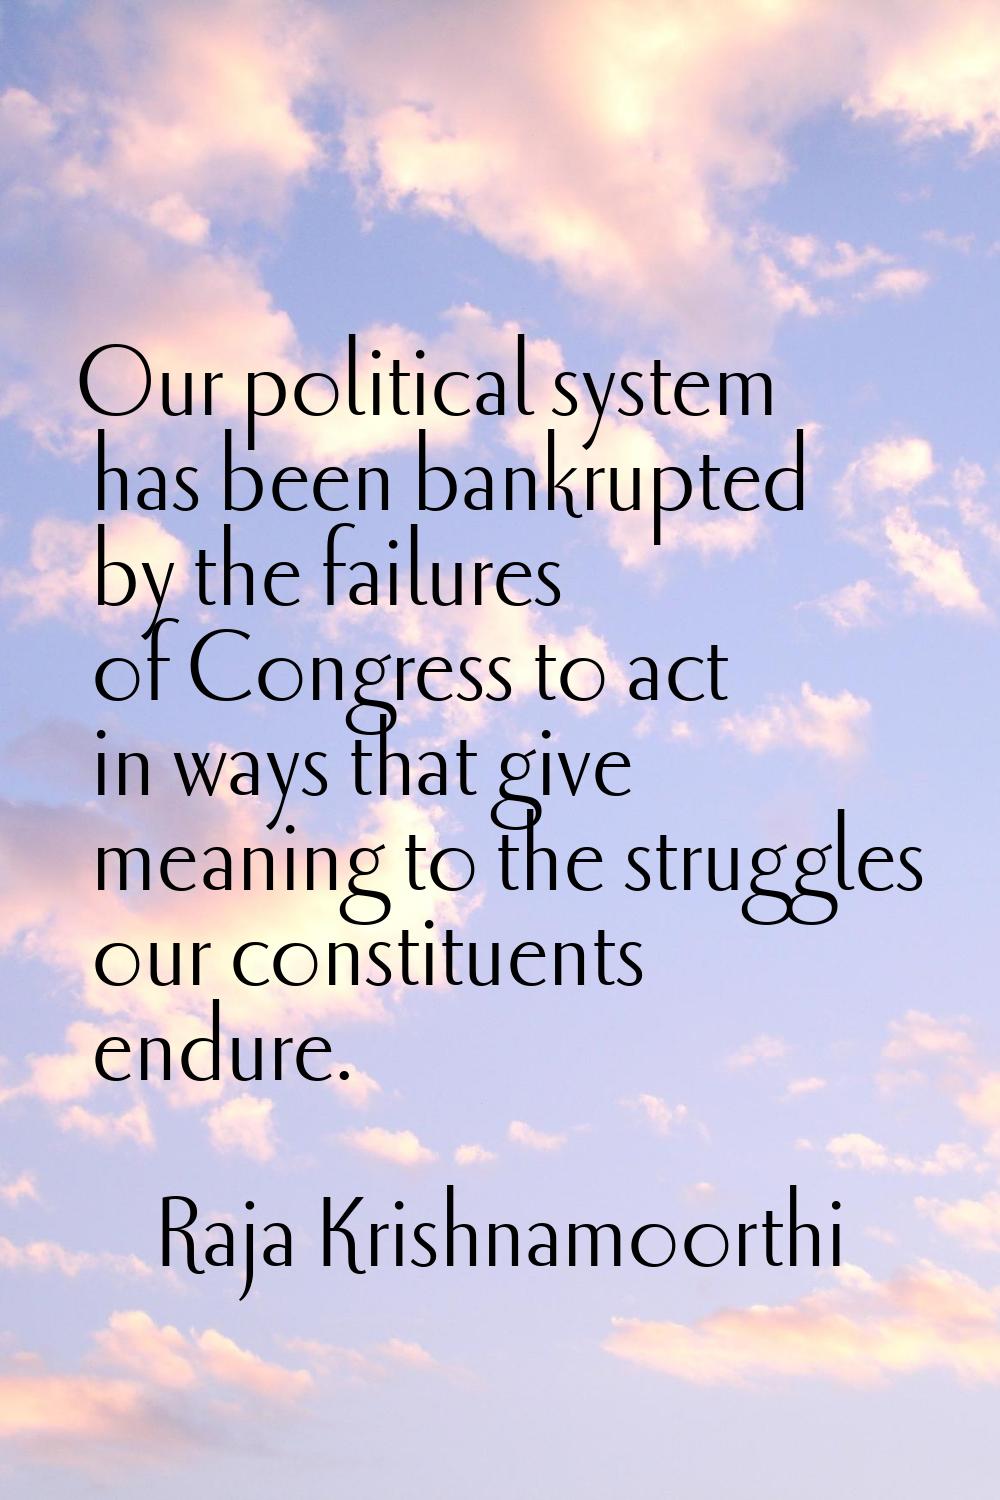 Our political system has been bankrupted by the failures of Congress to act in ways that give meani